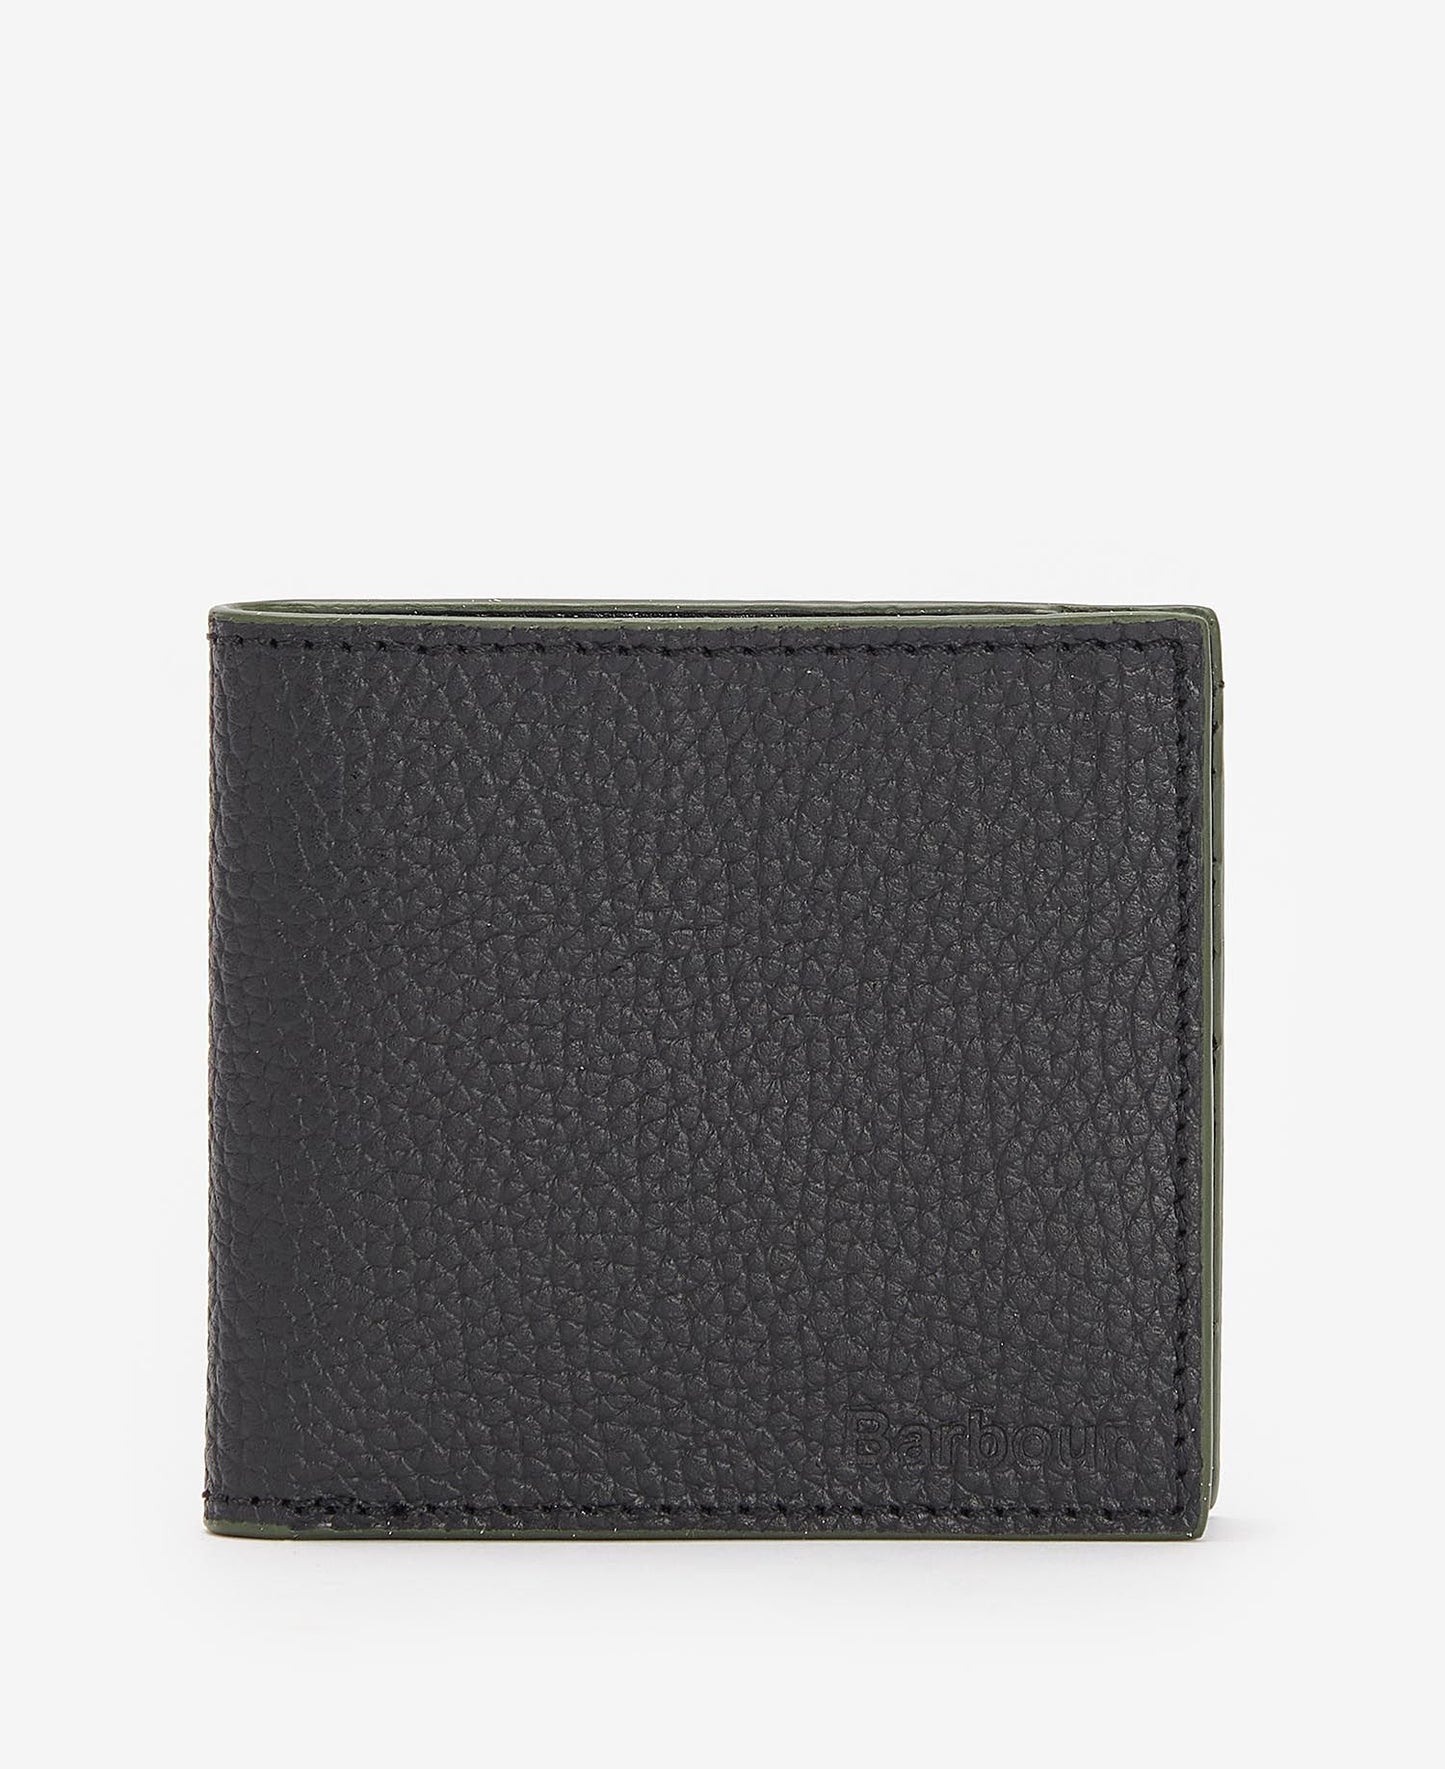 Barbour Leather Billfold